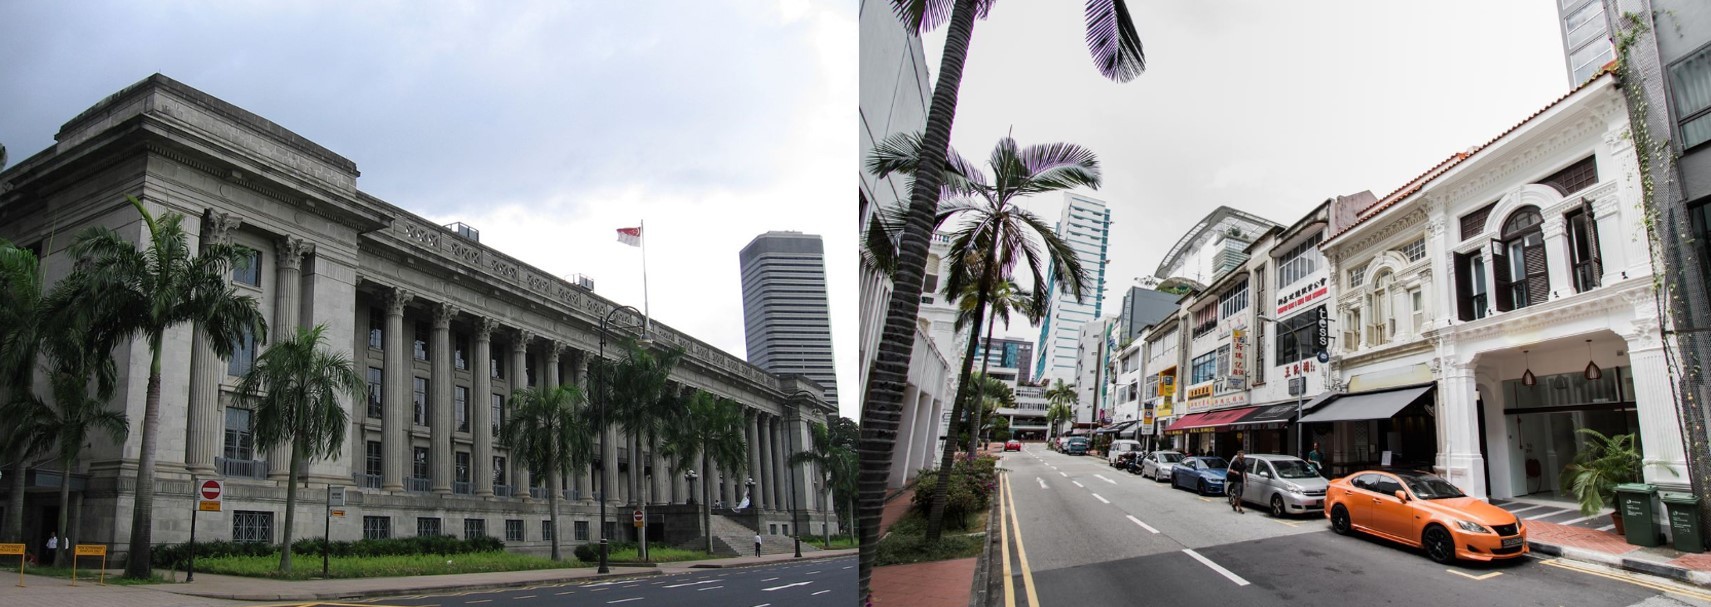 Students visit nature of the jobic landmarks the City Hall and heritage streets of Singapore